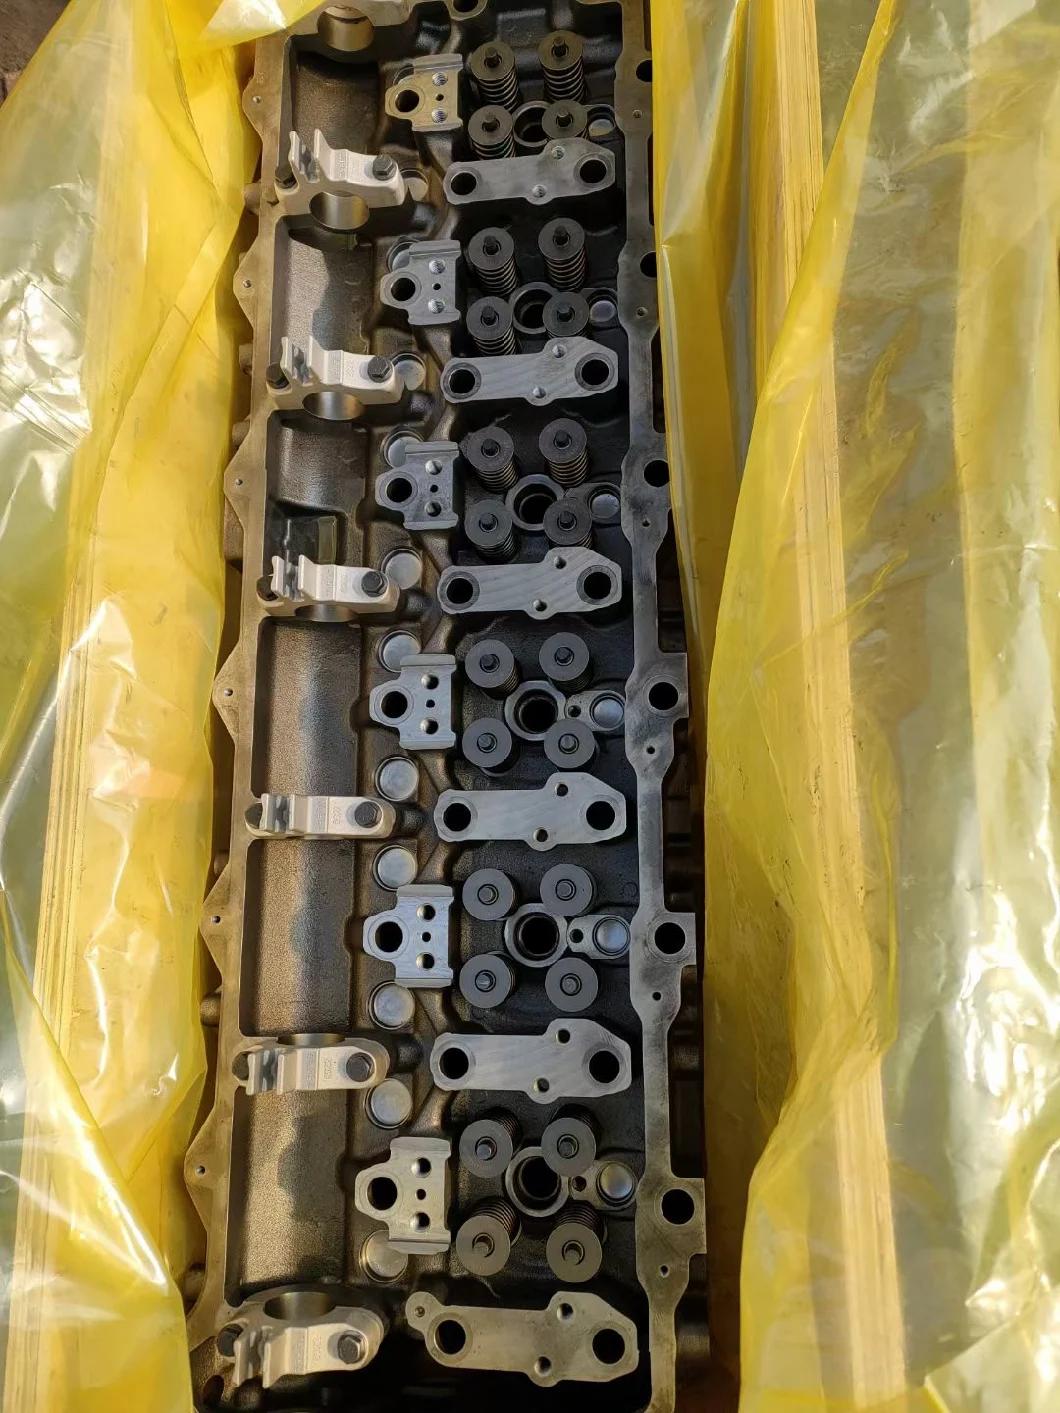 Man Mt13 Cylinder Head Assembly 202-00010-7311